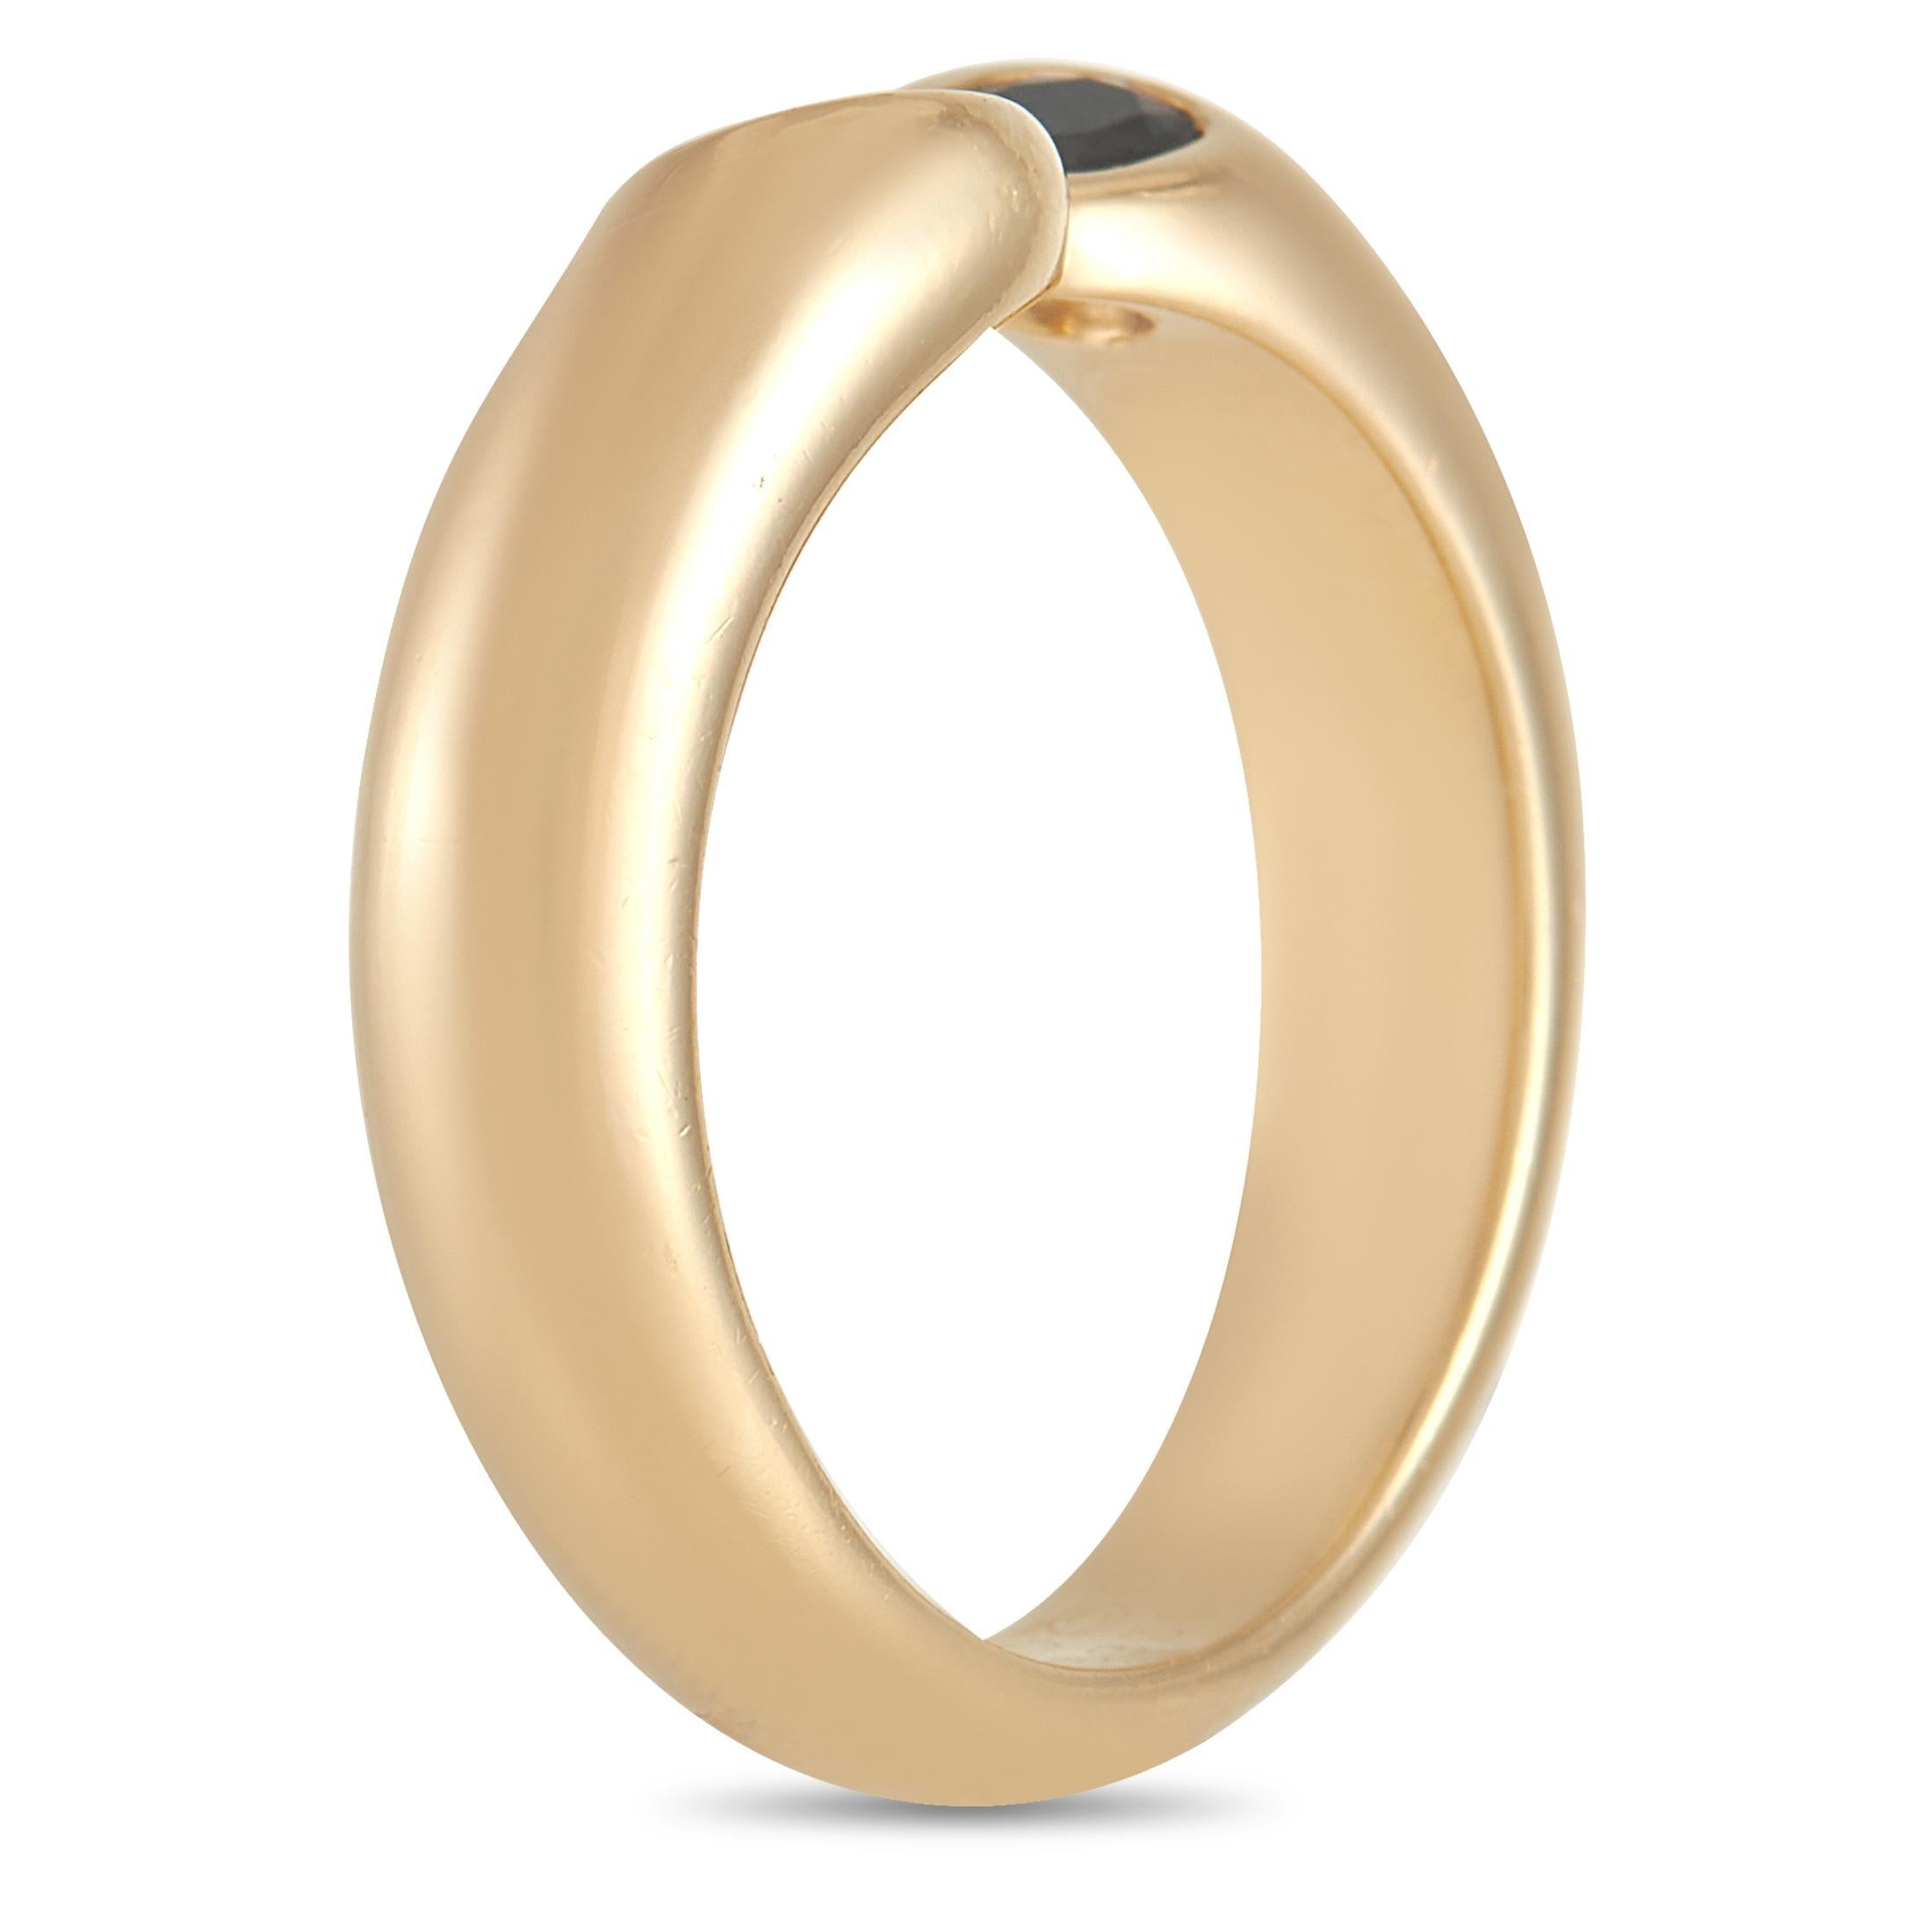 Despite its simple, streamlined aesthetic, there’s something decidedly contemporary about this Cartier ring’s negative space design. A bold 4mm wide band crafted from 18K Yellow Gold provides the perfect foundation for this luxury piece, which is